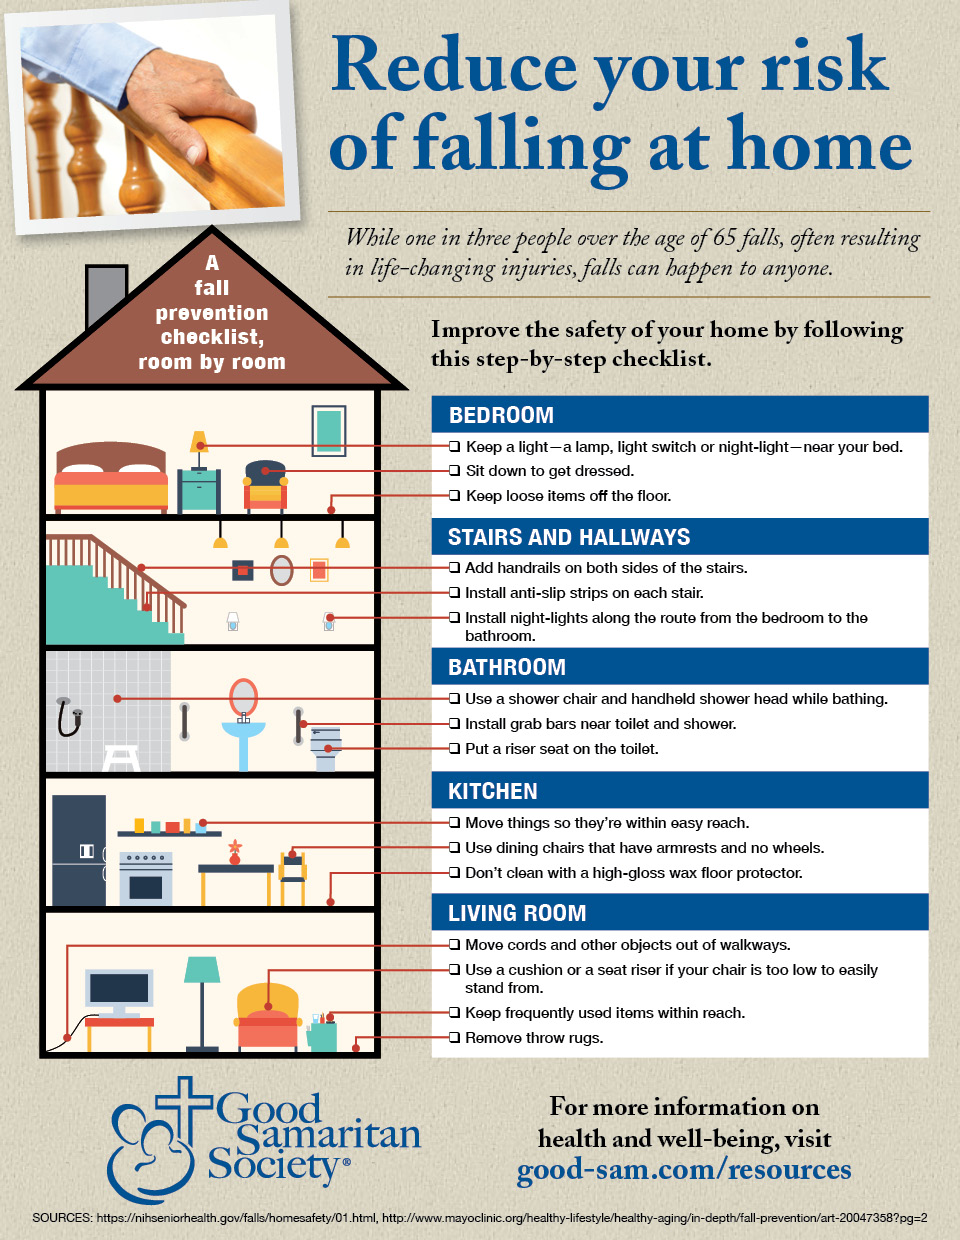 Reduce your risk of falling at home infographic